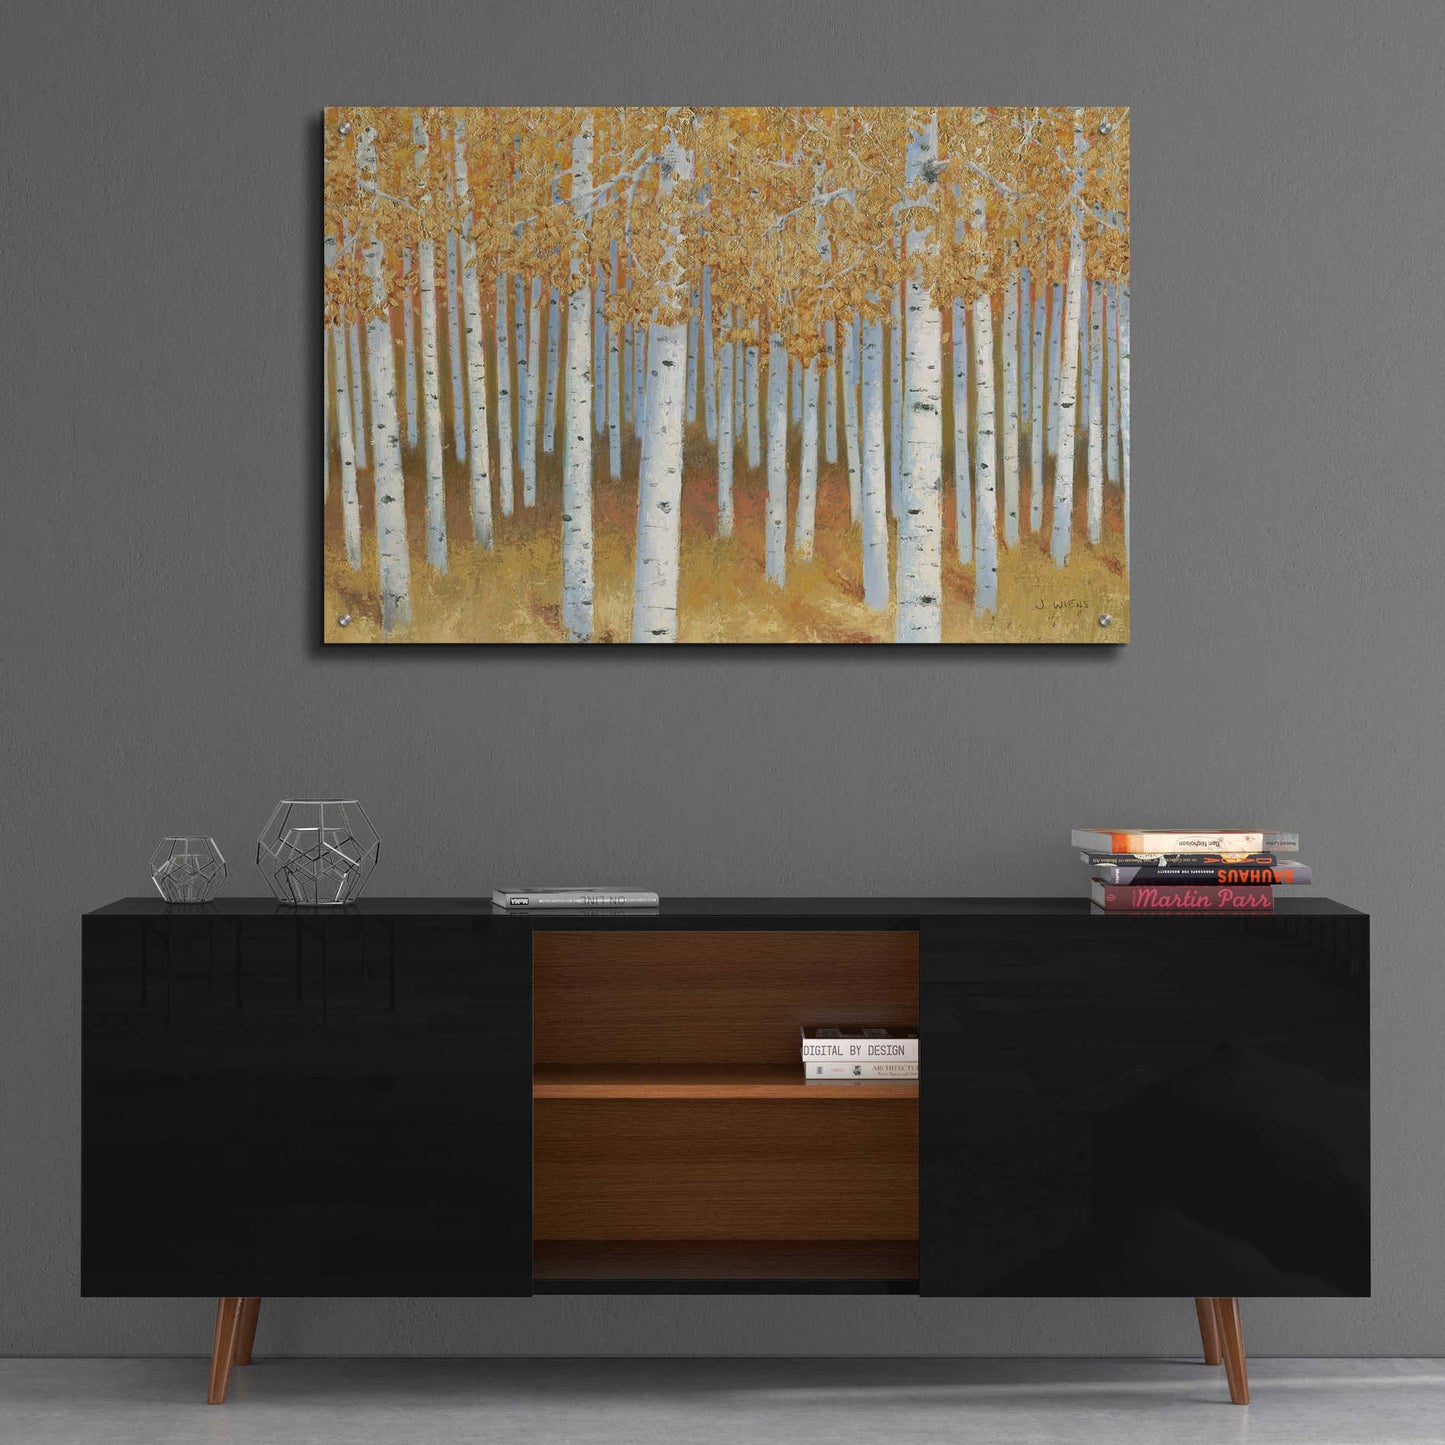 Epic Art 'Forest of Gold' by James Wiens, Acrylic Glass Wall Art,36x24